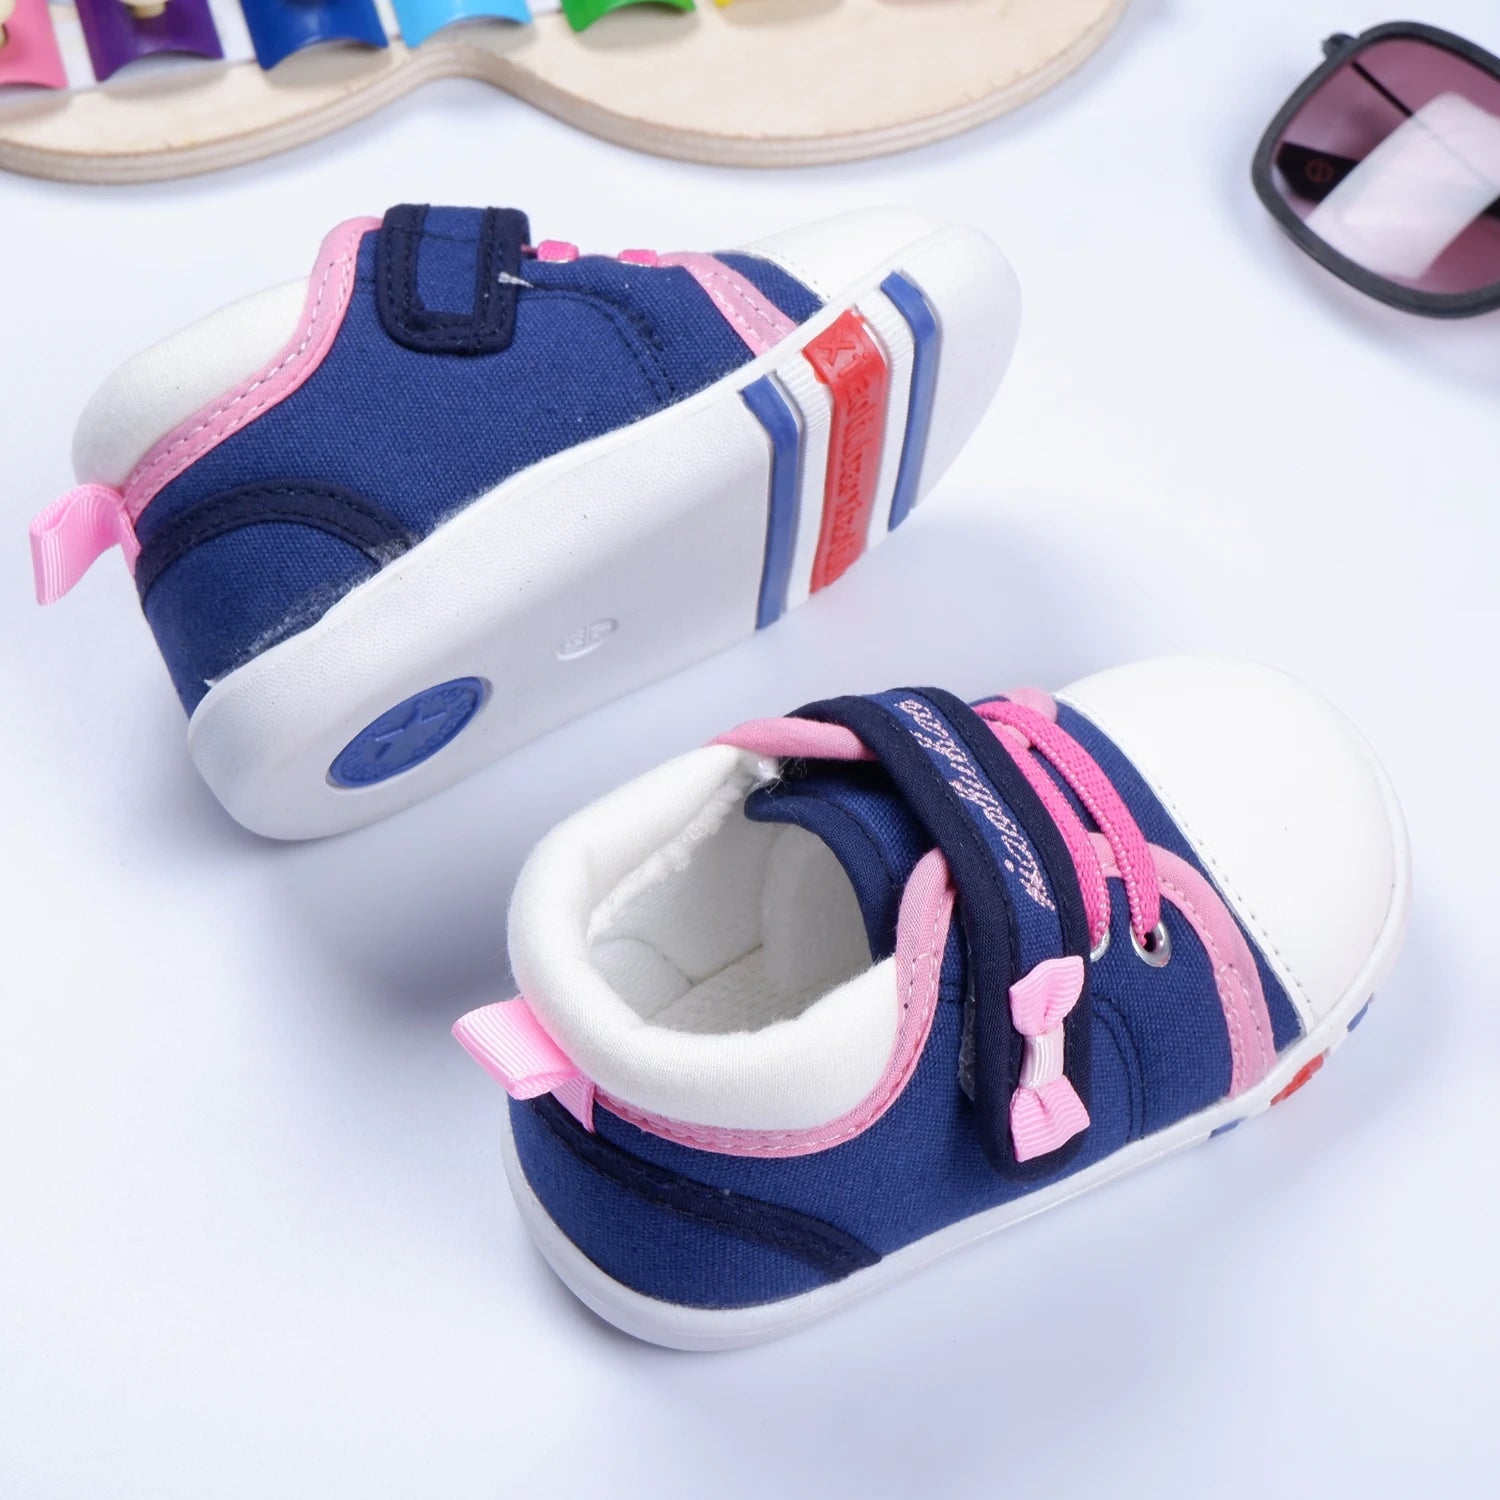 Small cute baby shoes - Unisex